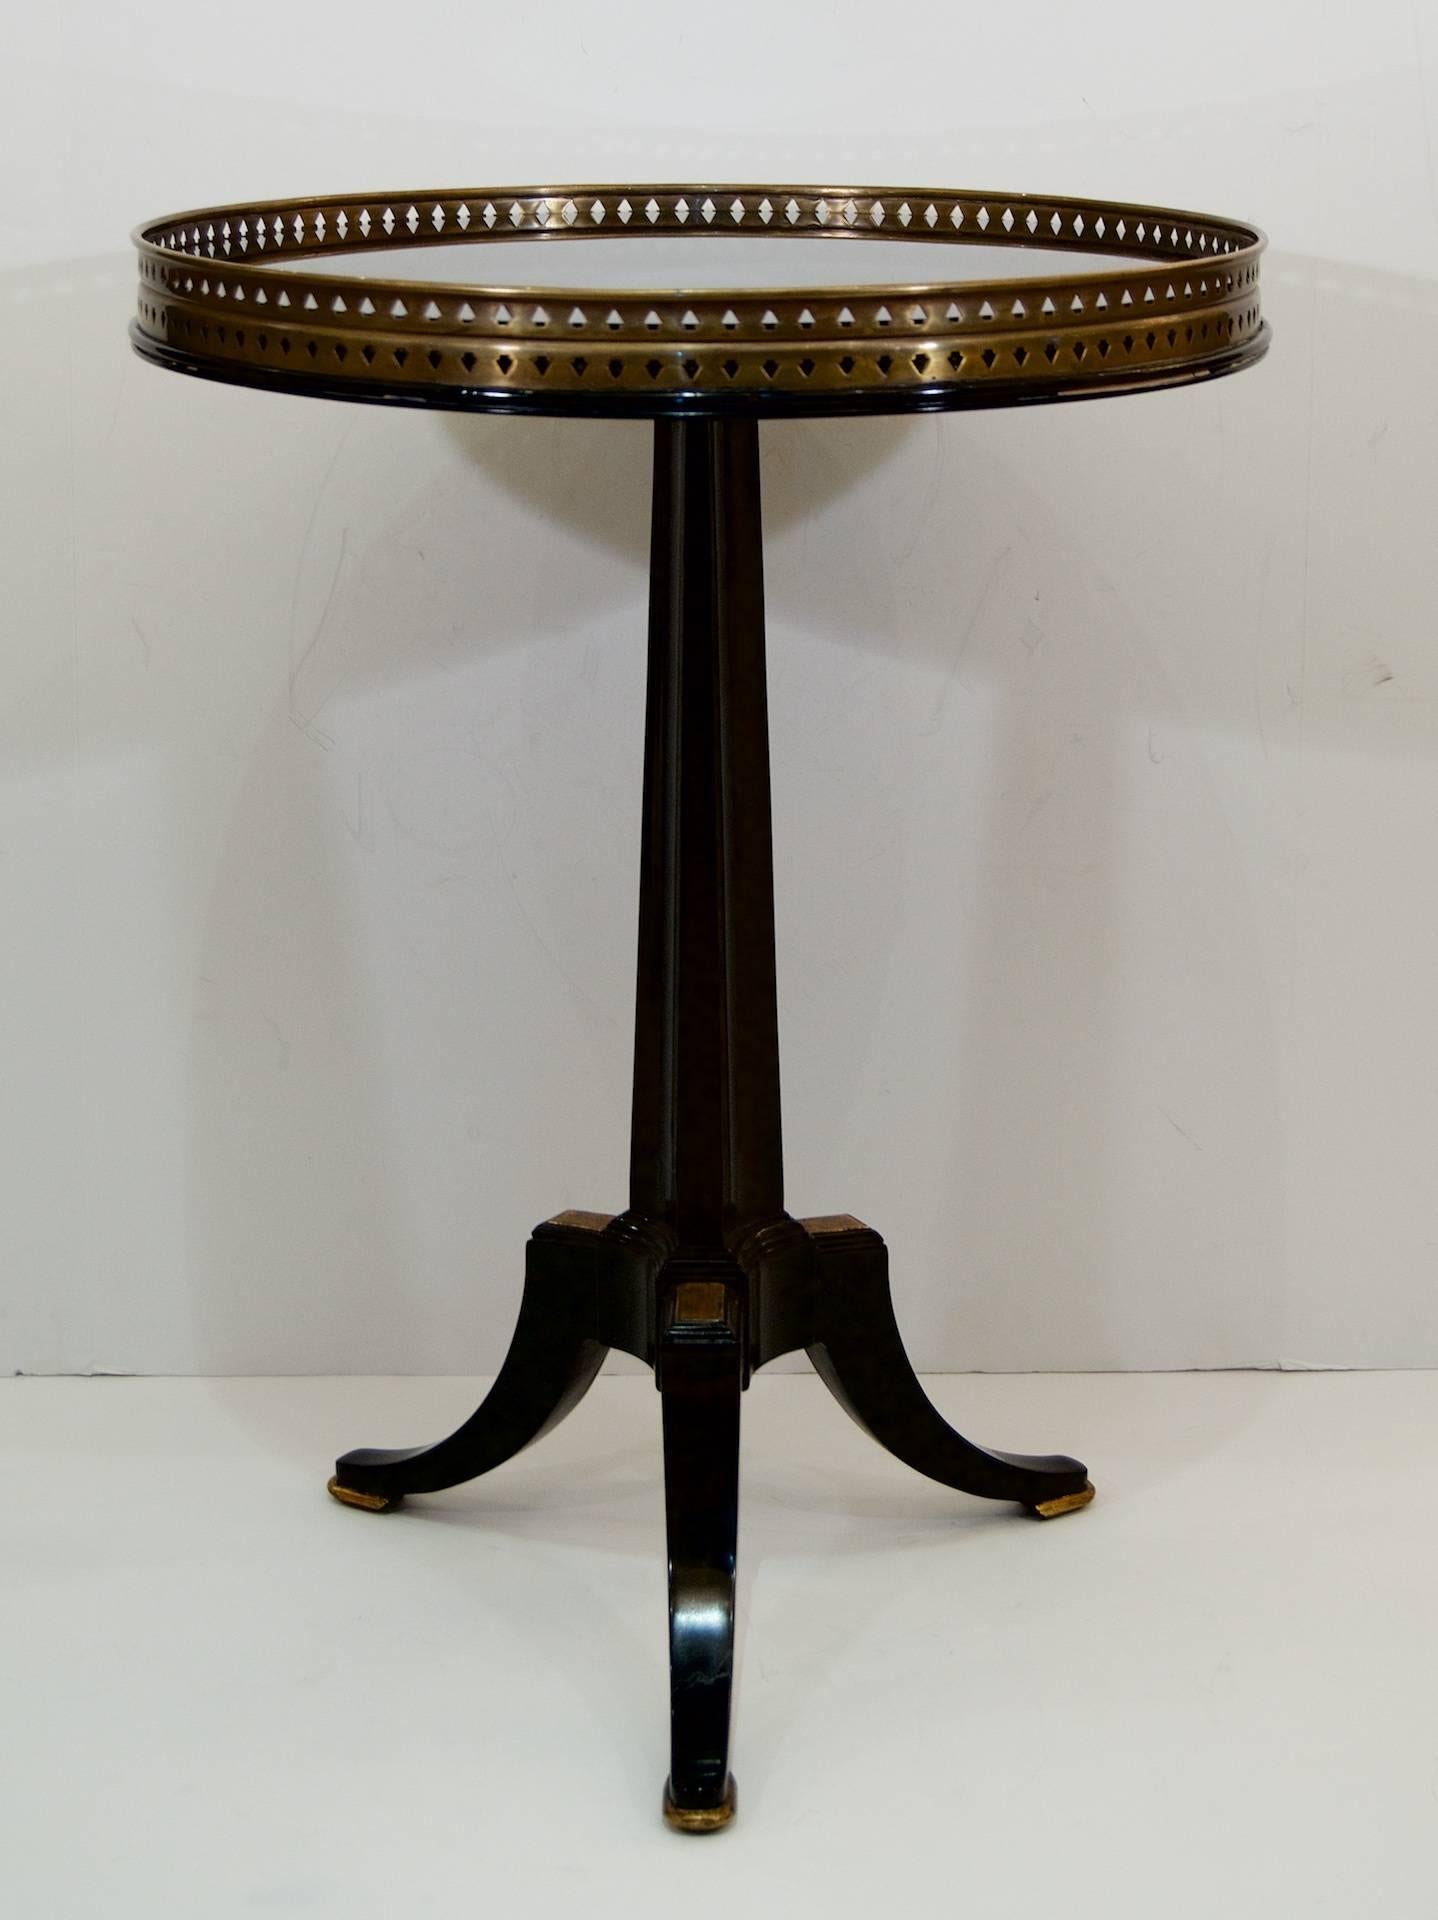 French style ebonized and gilt gueridon table with black glass inset top.